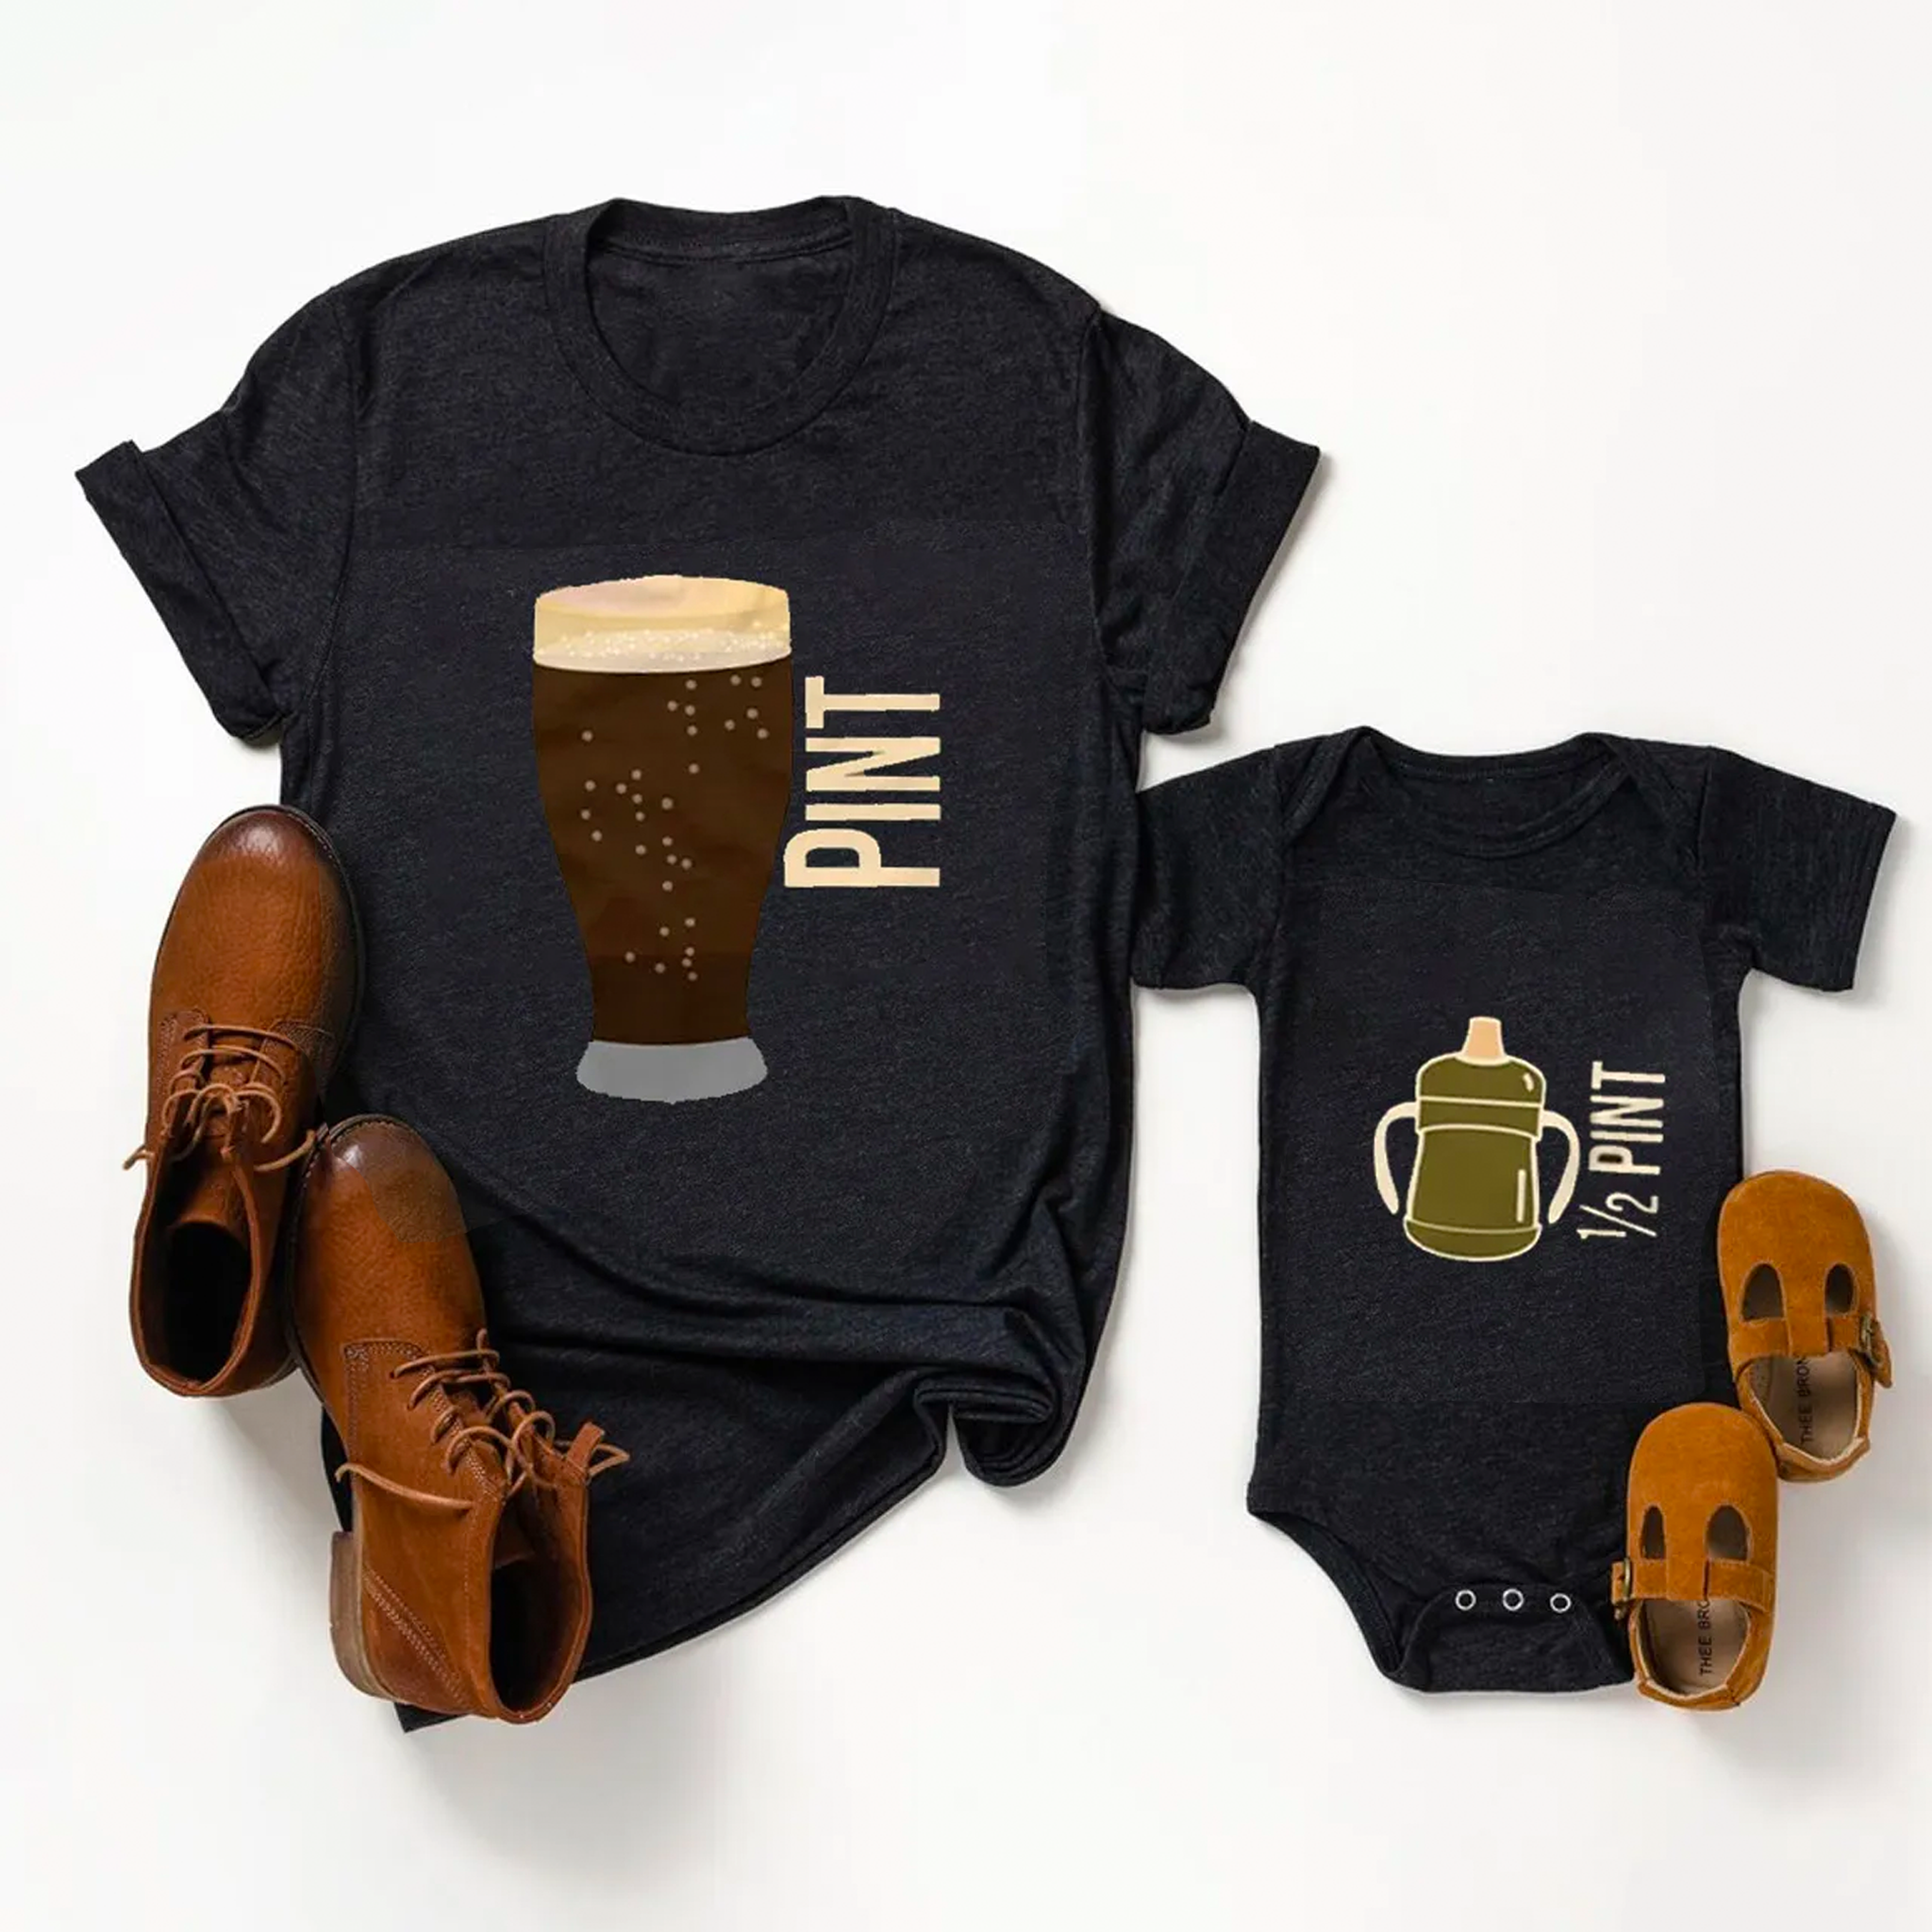 Pint Half Pint Matching Shirt For Daddy And Me